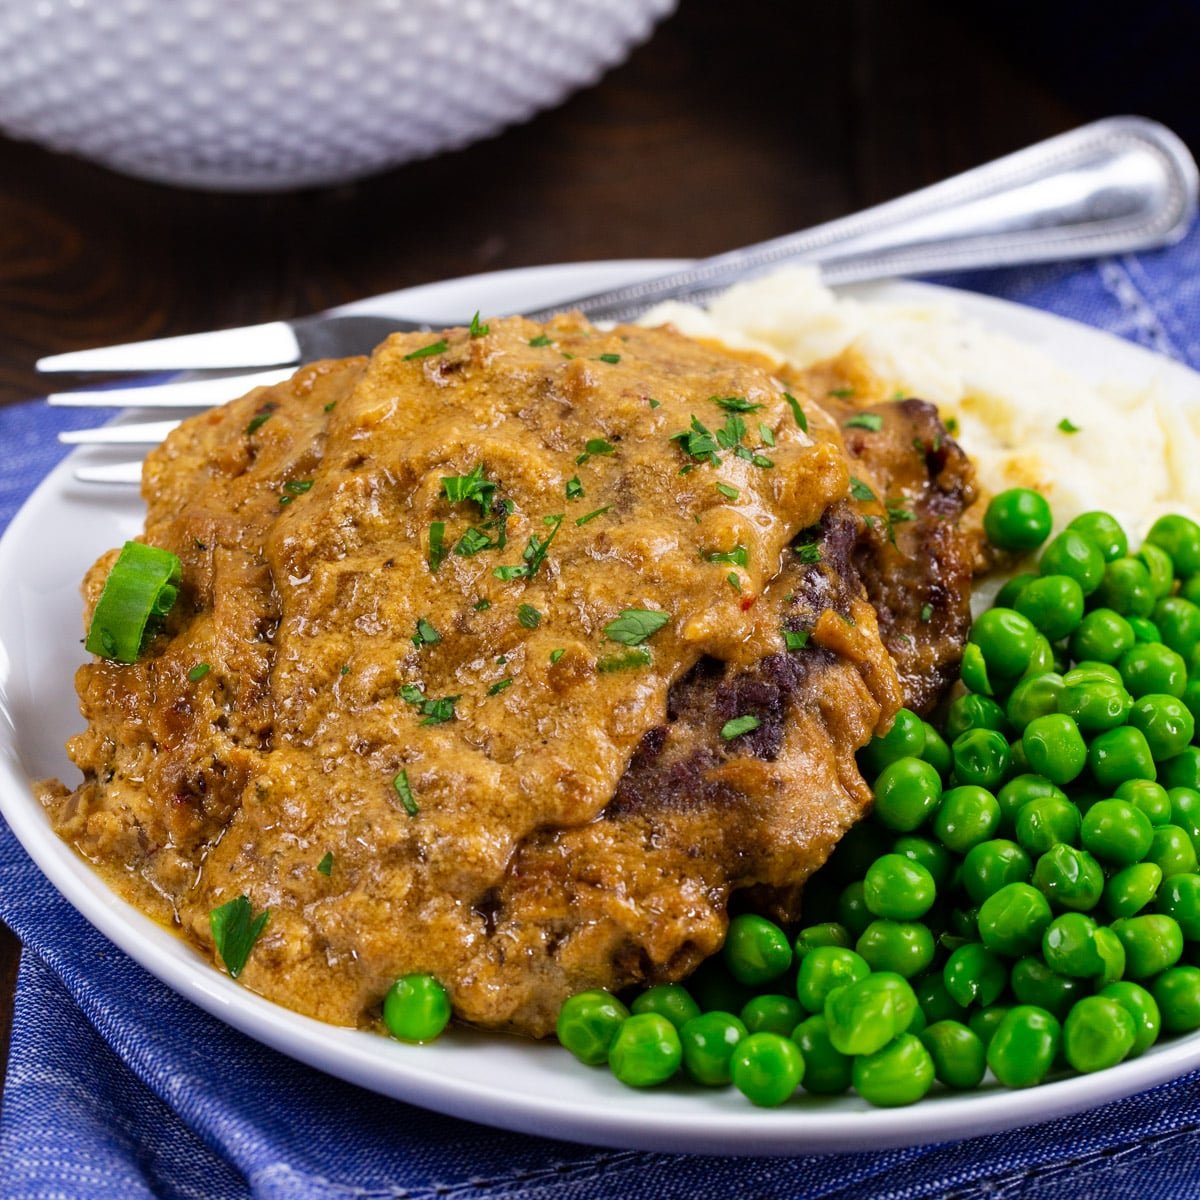 Sour Cream Cubed Beef on plate with mashed potatoes and peas.